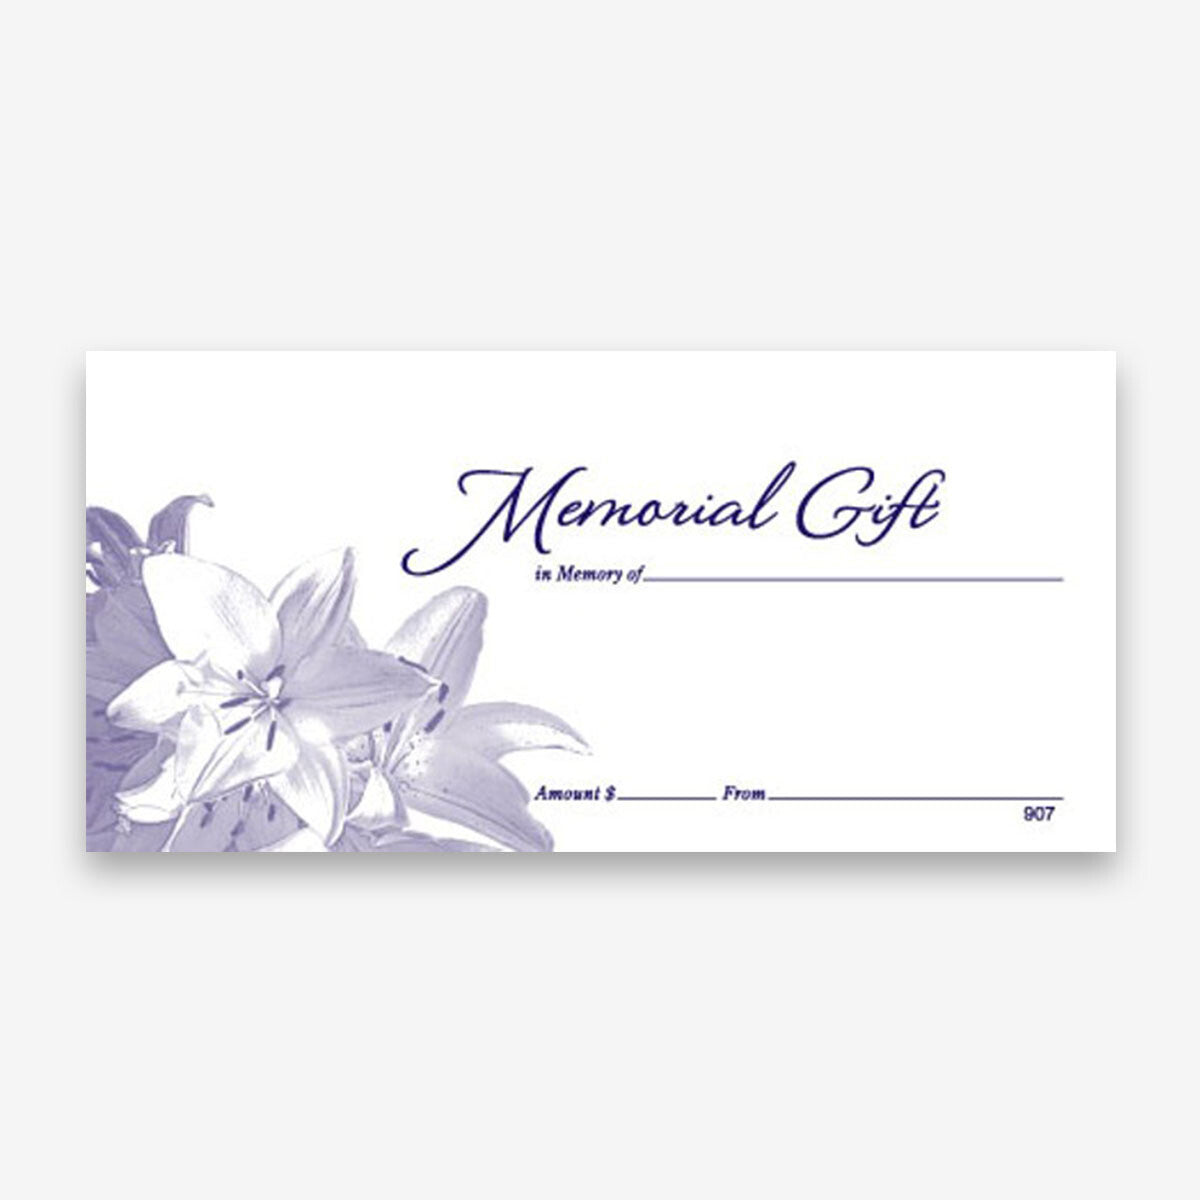 NCS National Church Solutions Memorial Gift Offering Envelope